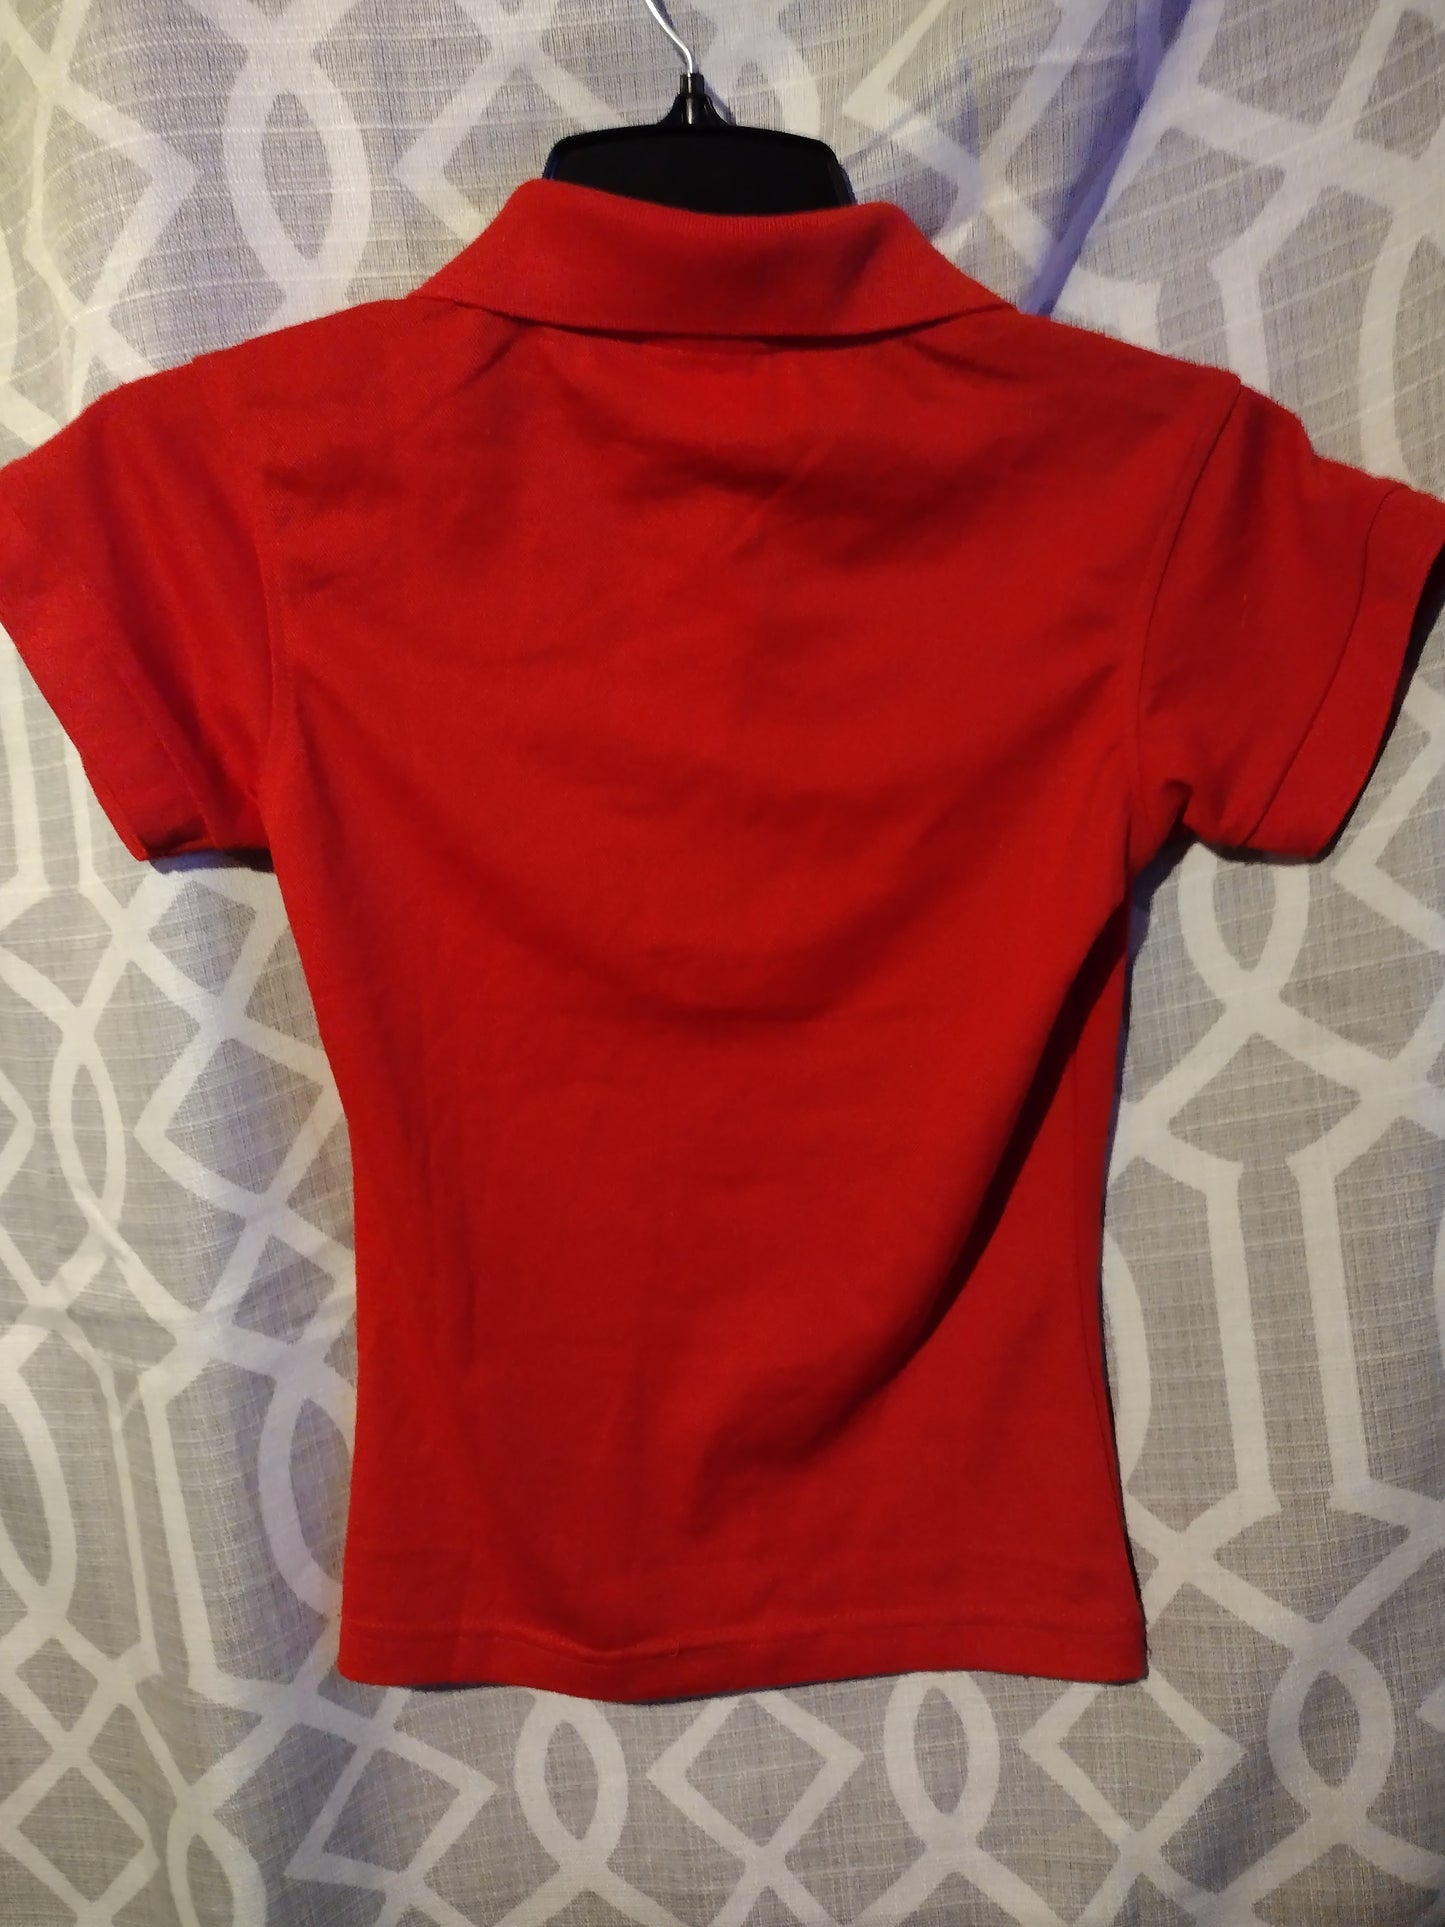 Little girl Red Lacoste shirt size 5